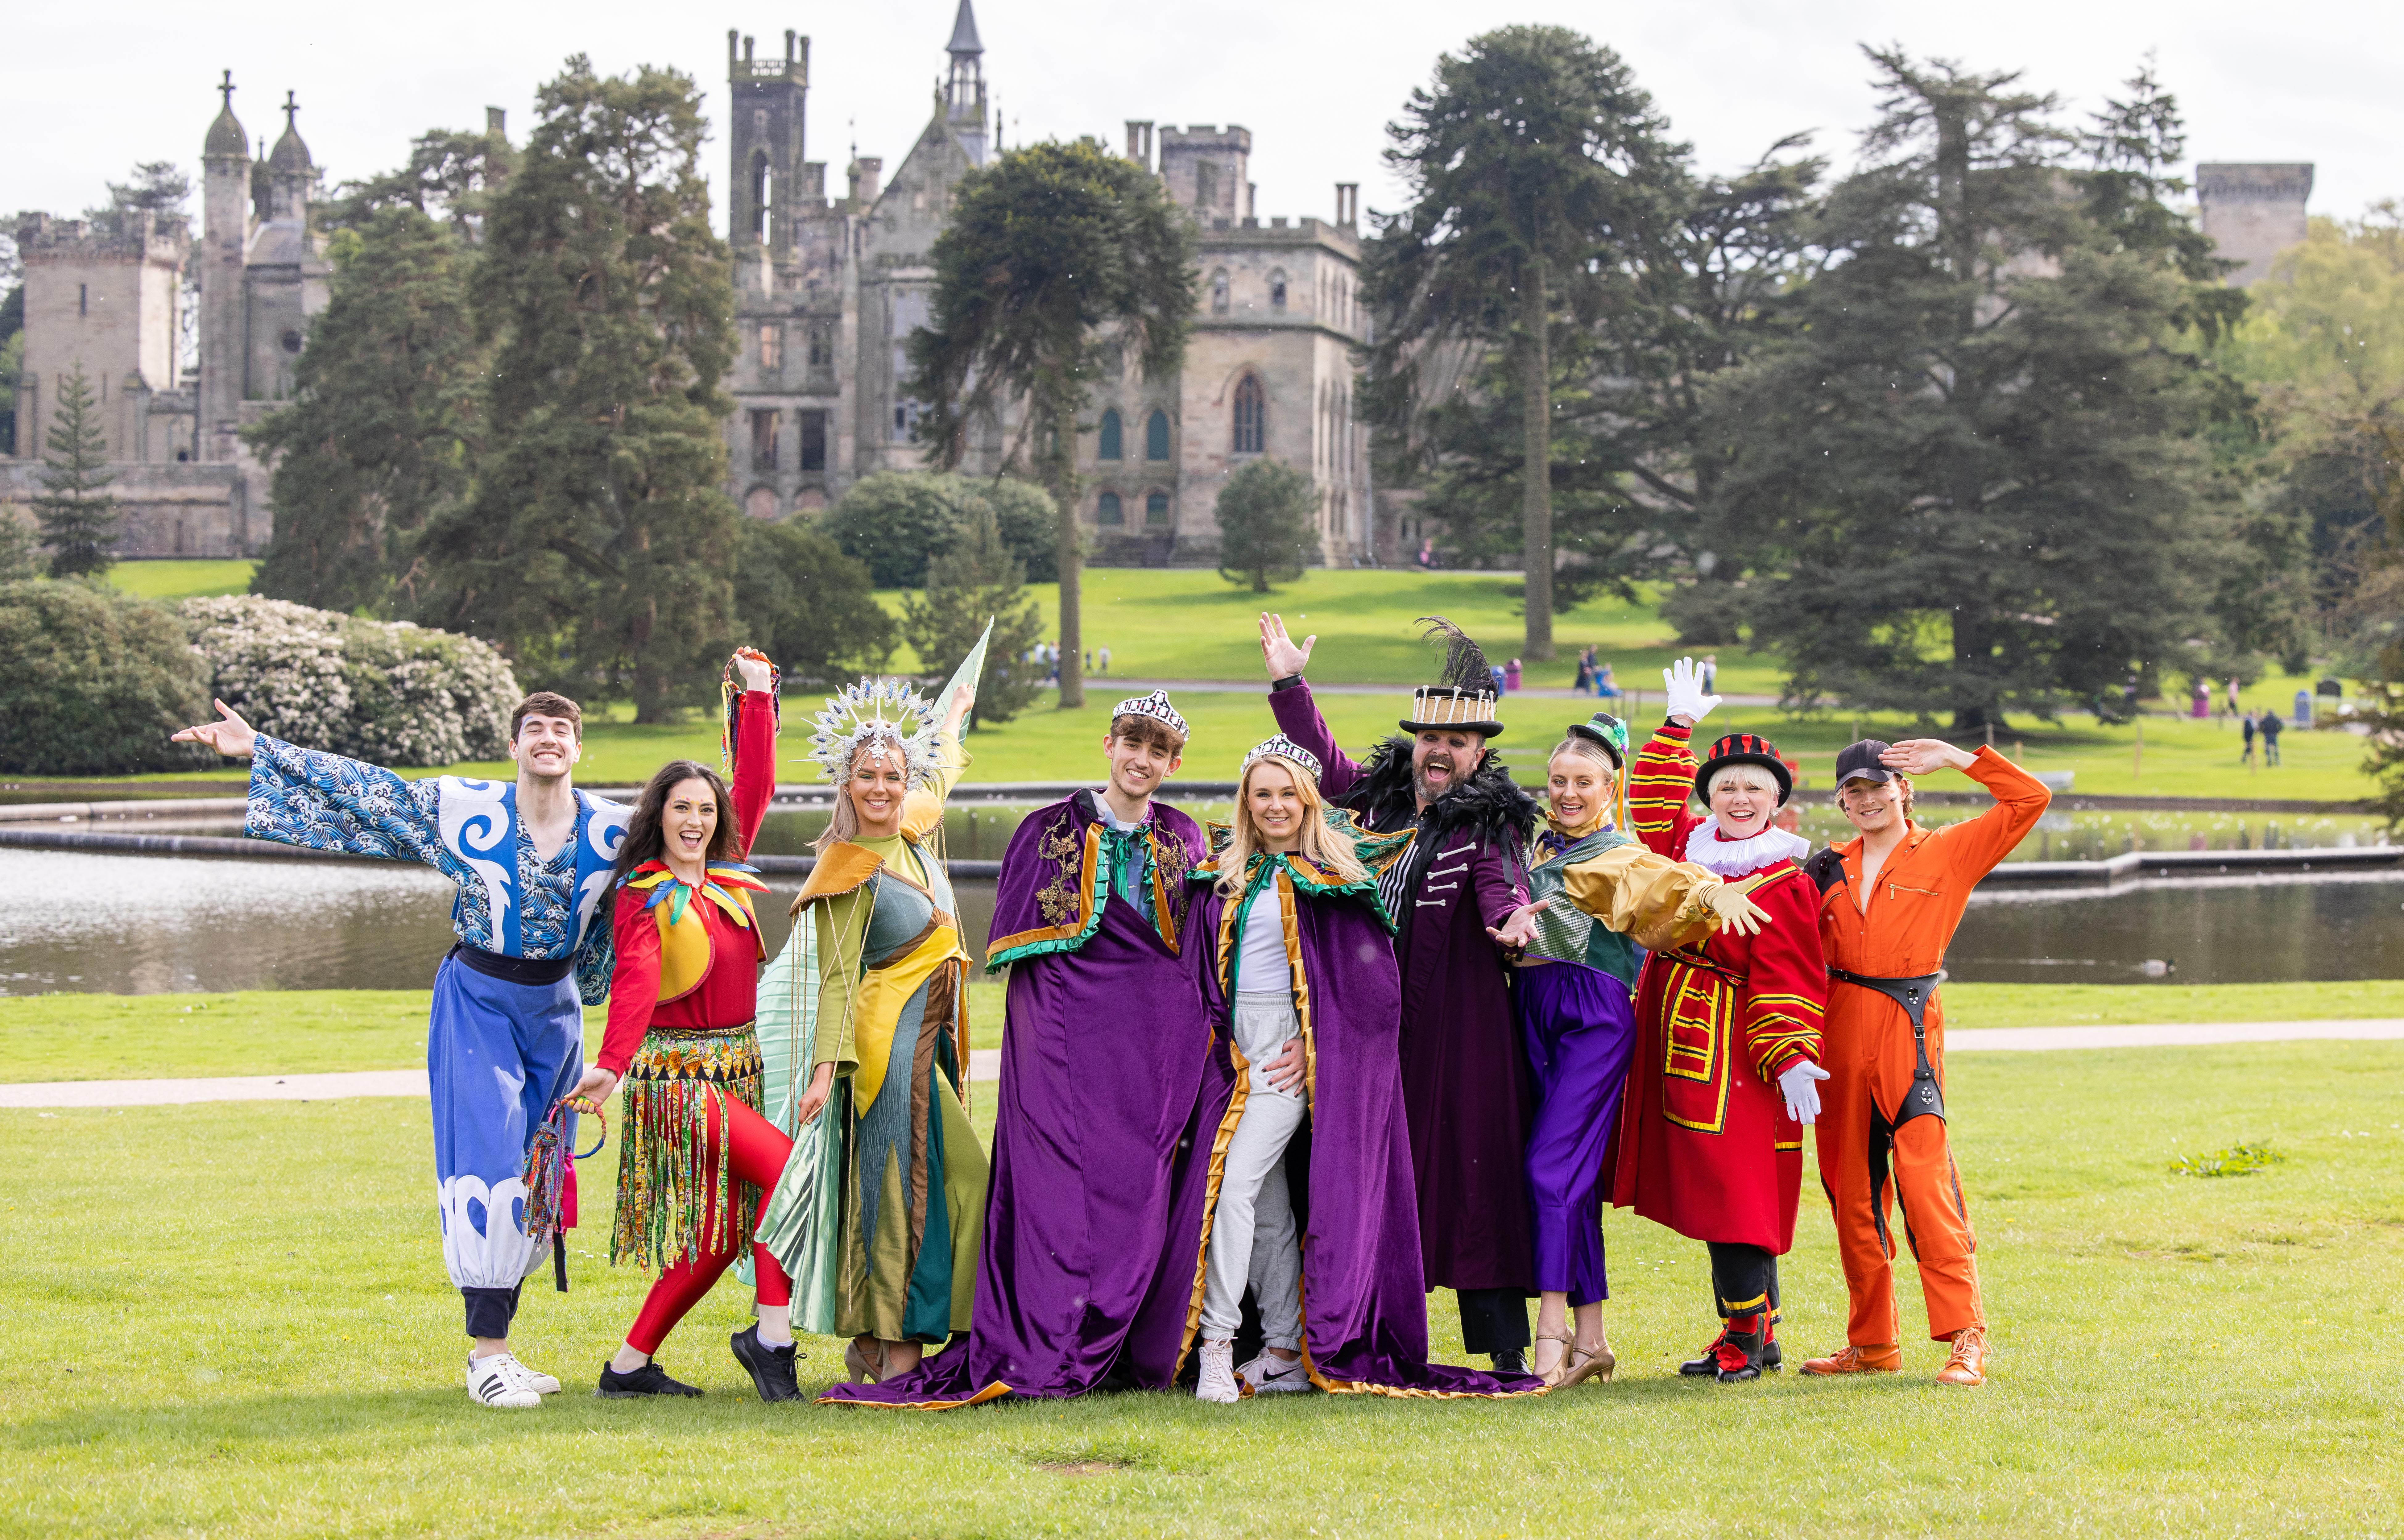 Alton Towers Resort reveals exclusive ‘money can’t buy experience’ for Mardi Gras 2022